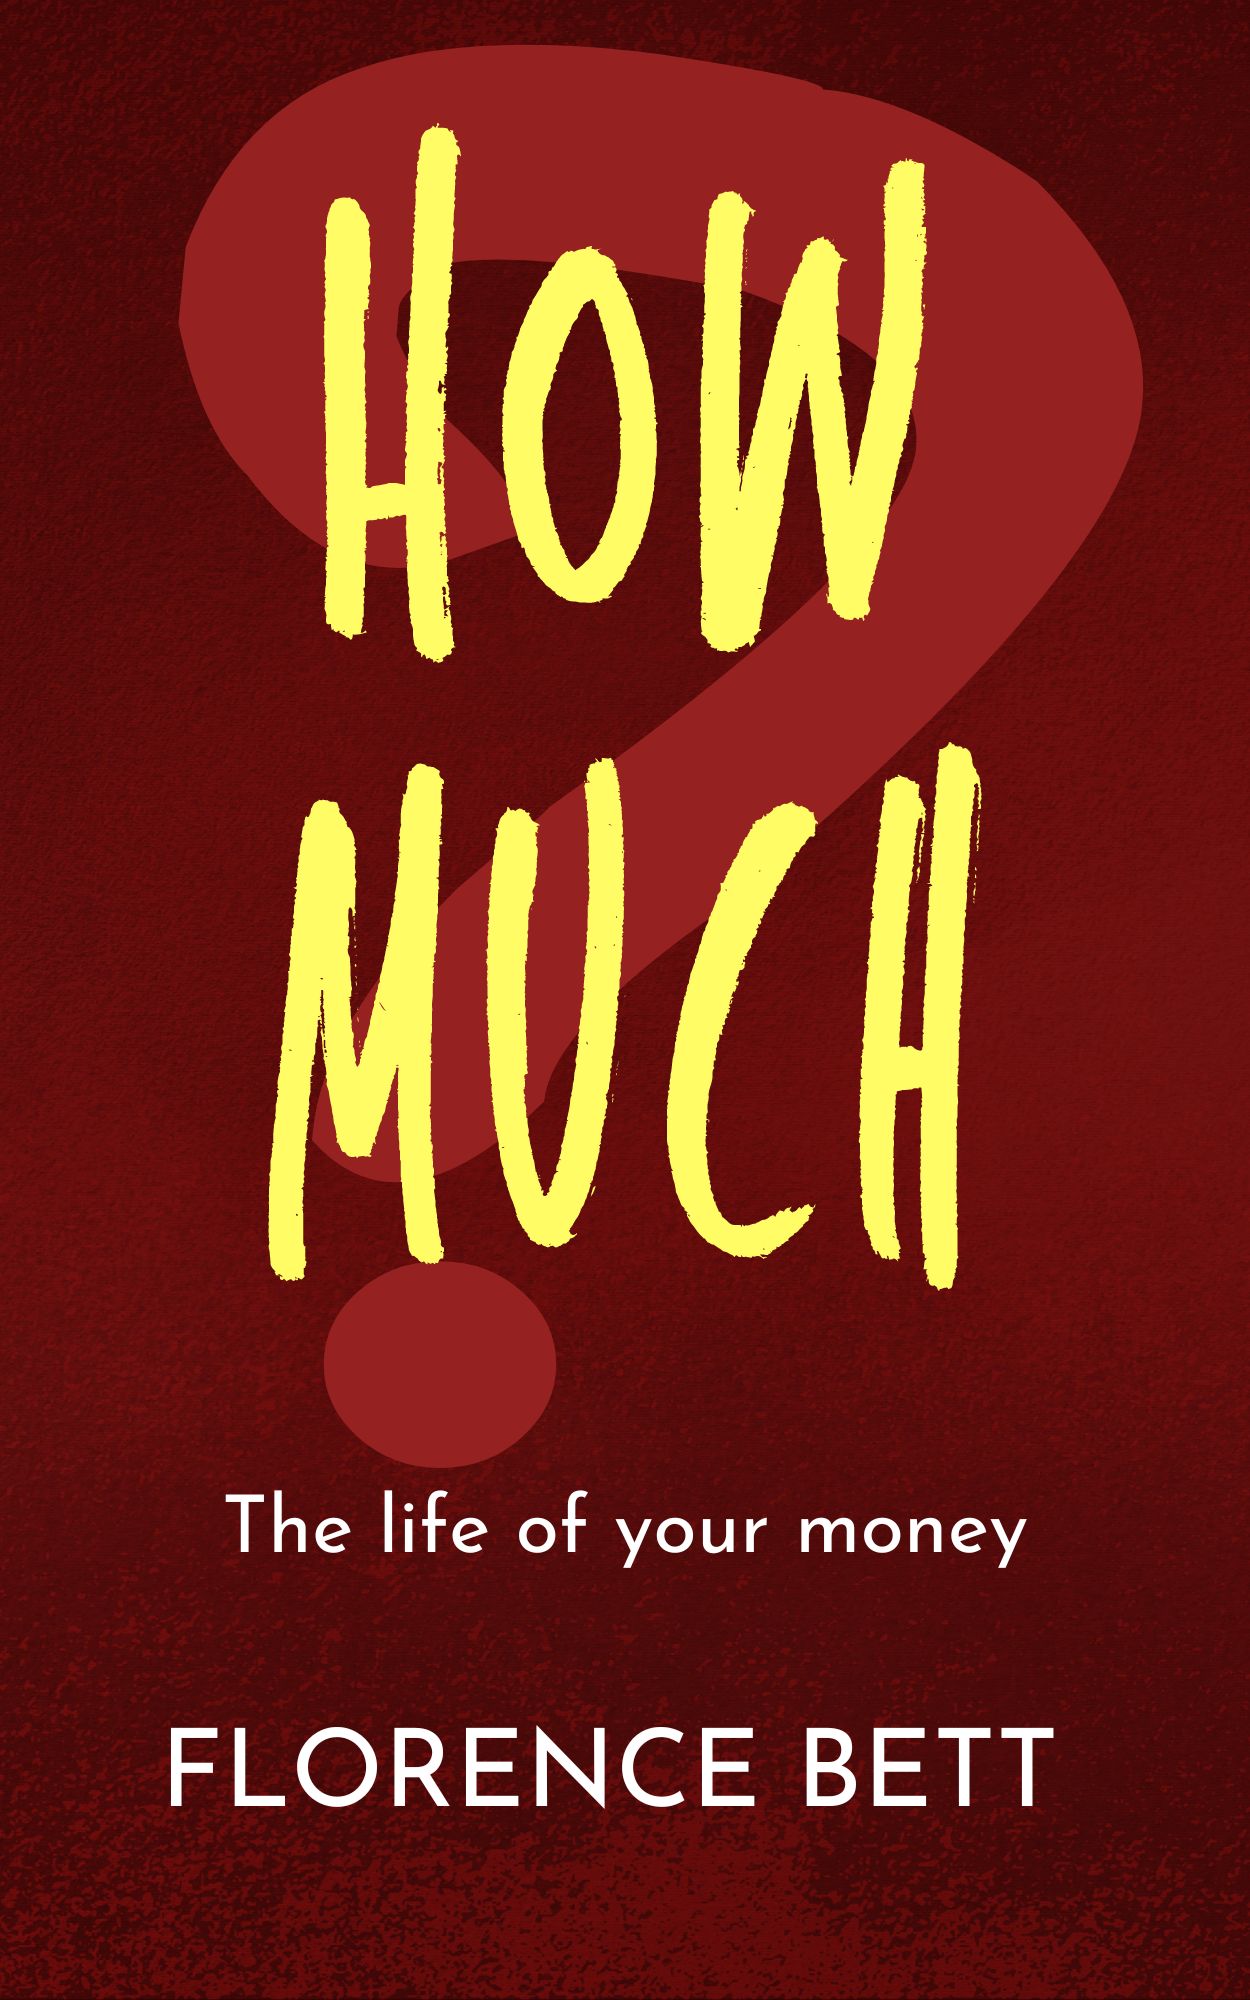 Nuria　Bett　The　Florence　life　Store　money　of　your　MUCH?　HOW　by